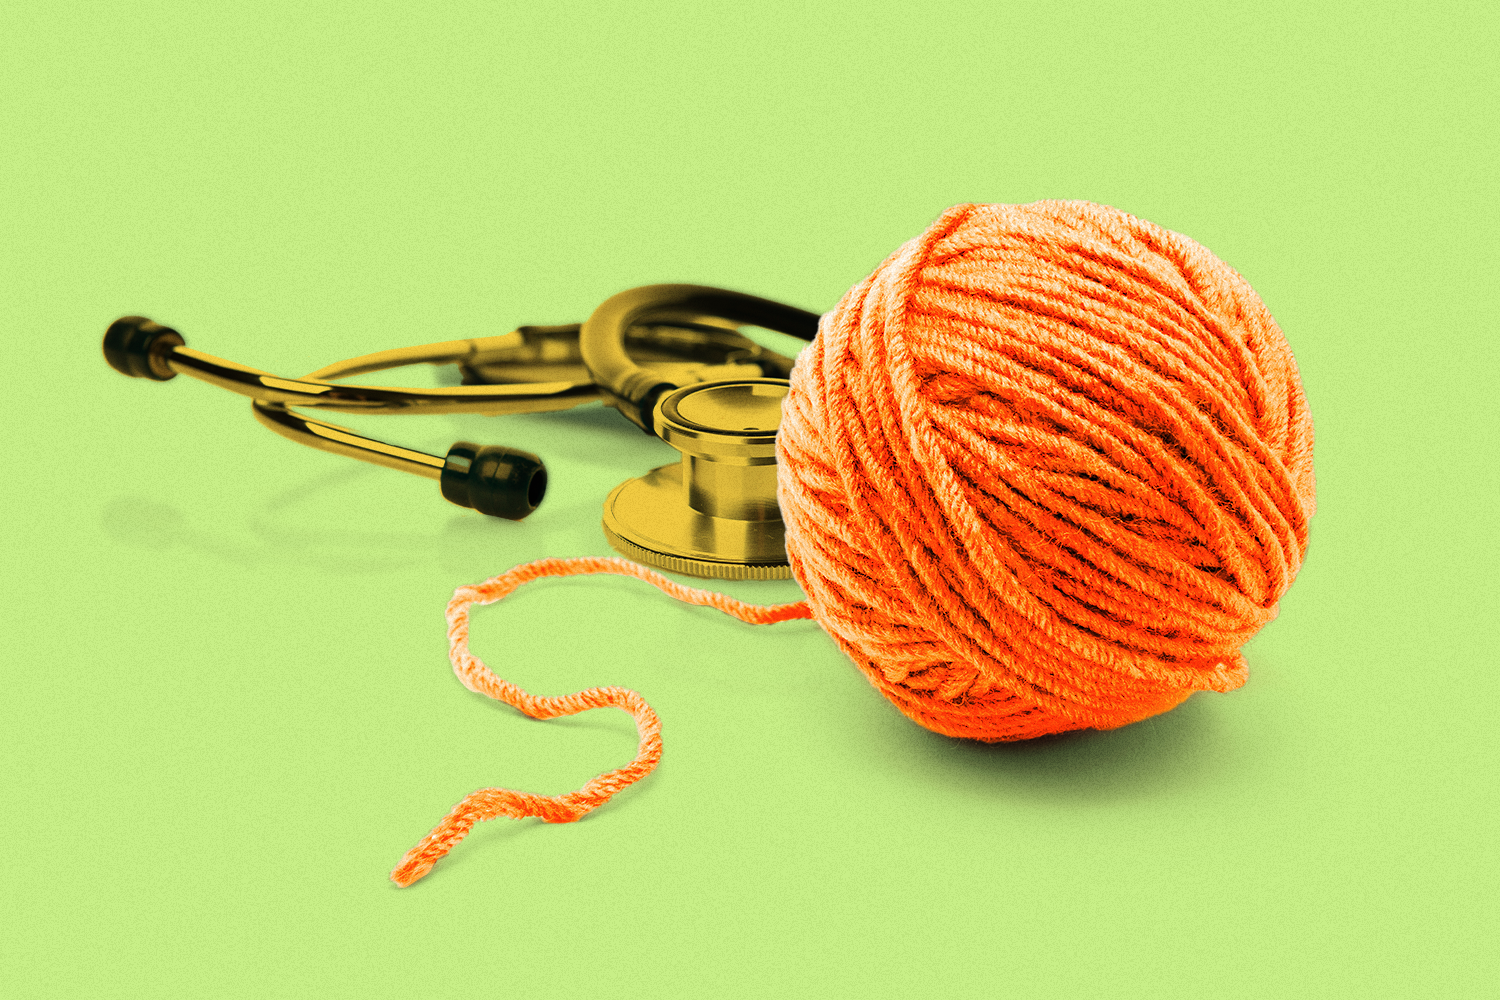 A stethoscope next to an unravelling ball of yarn on a light green background